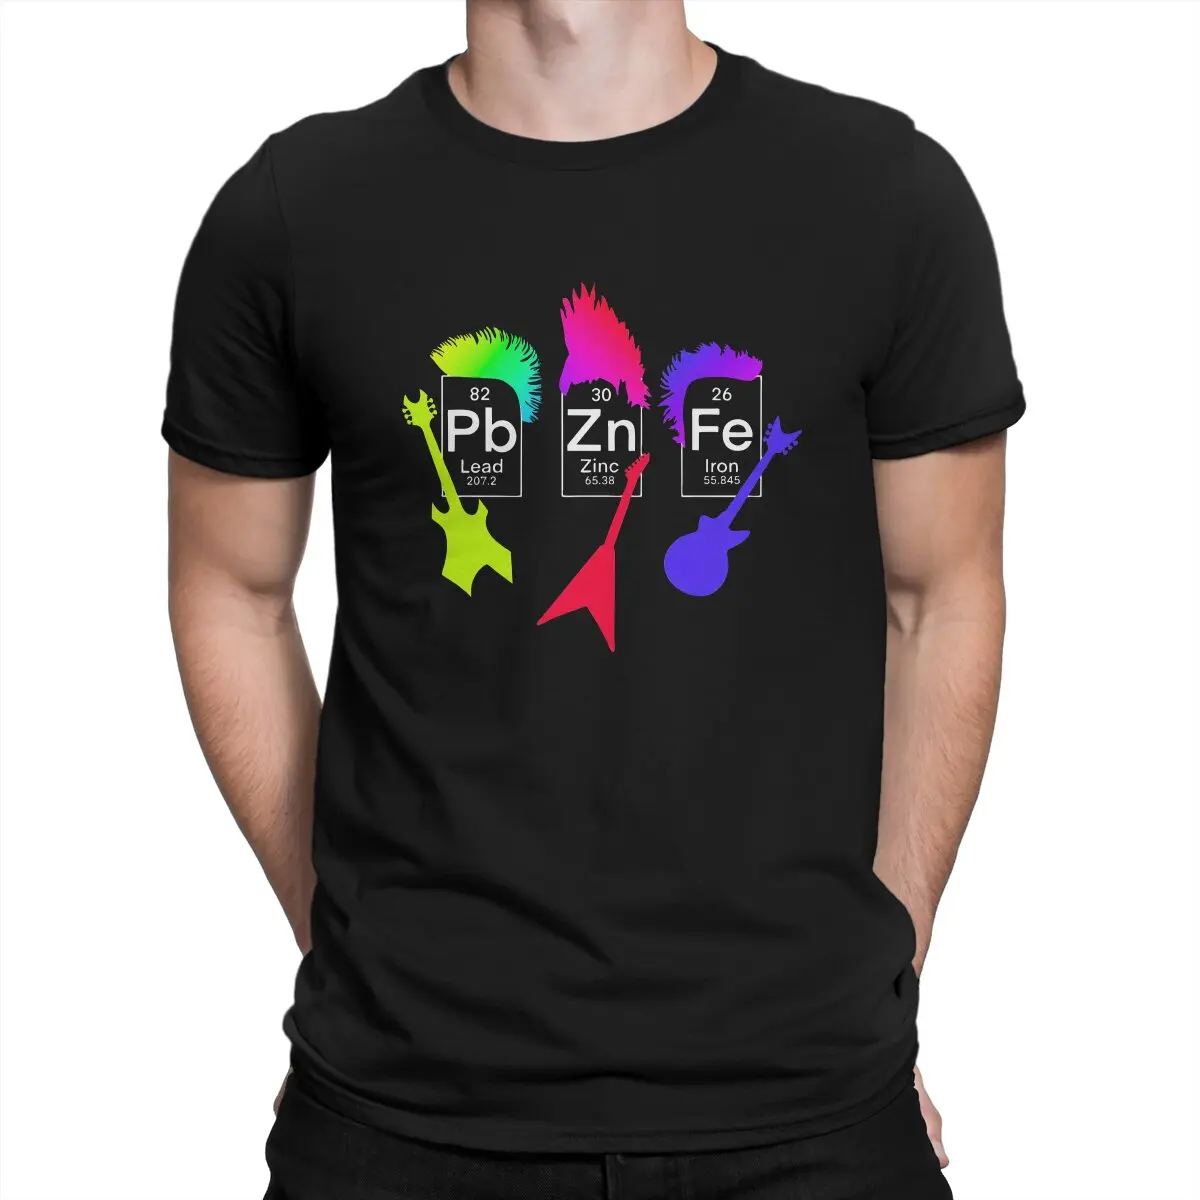 

Science Periodic Table Geek T-Shirt for Men The Heavy Metals Chemistry Amazing Cotton Tees Round Neck Short Sleeve T Shirt